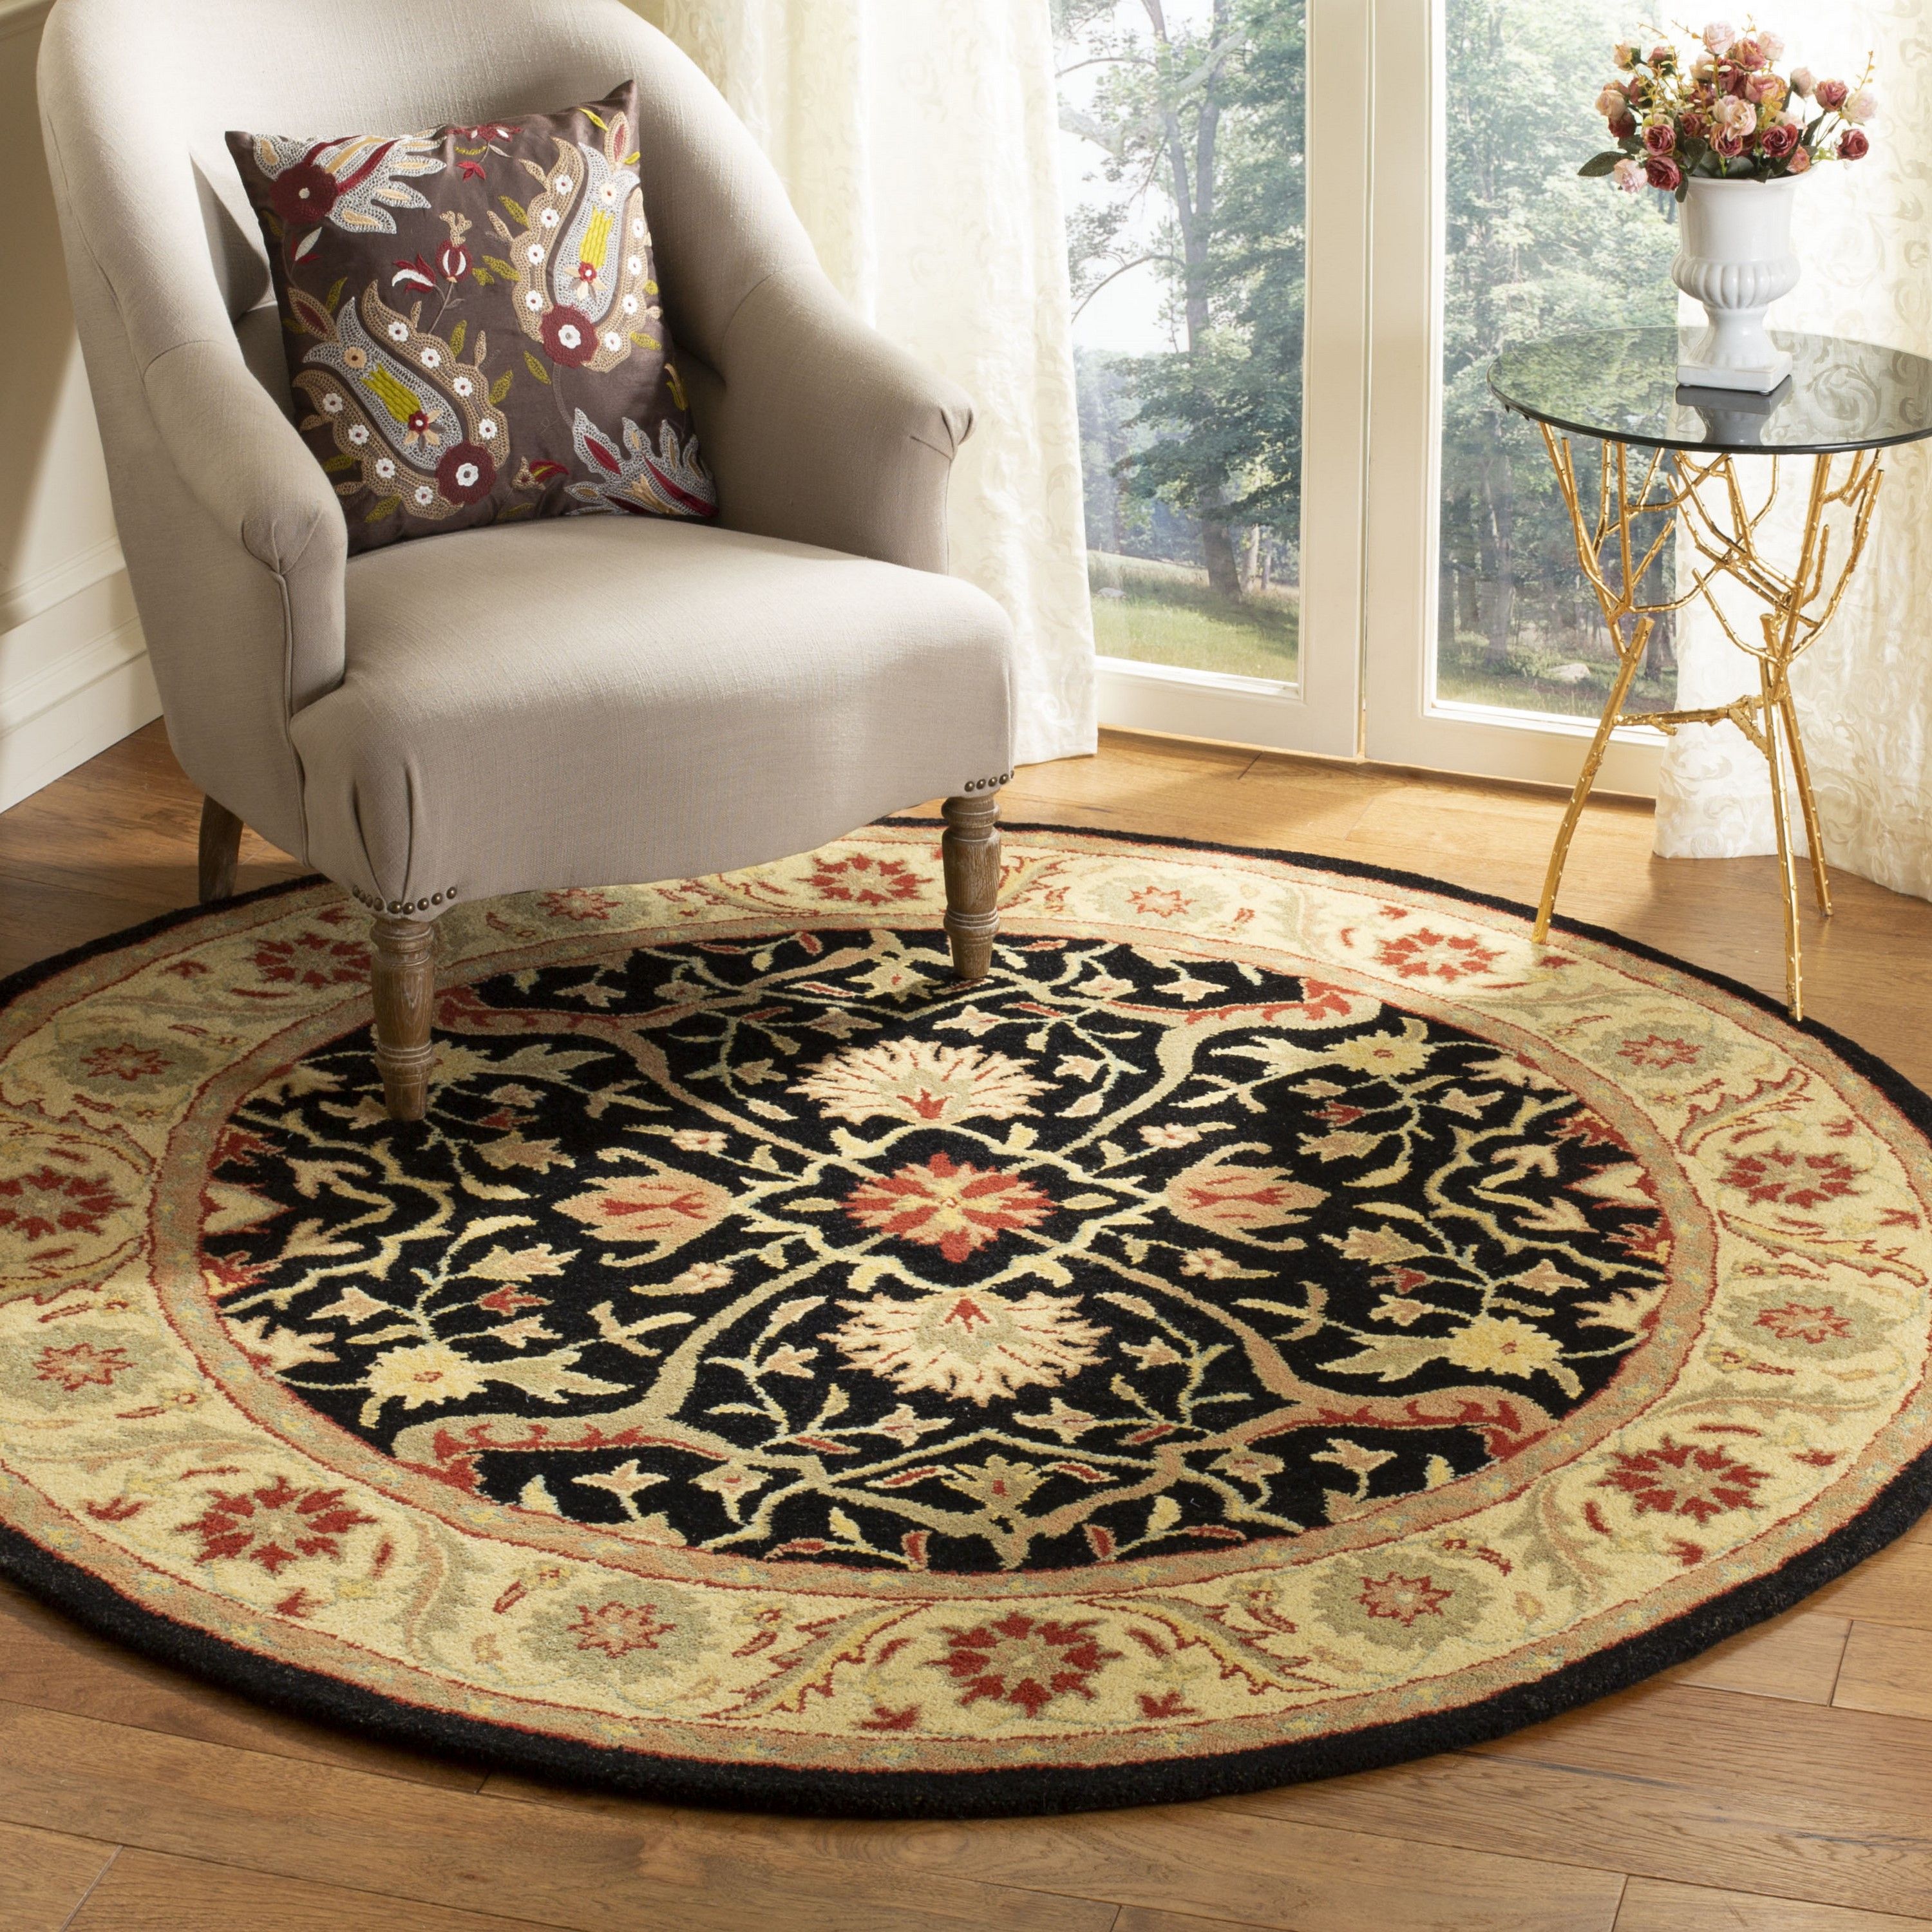 Safavieh 8 X 10 Wool Black Oval Indoor Floral/botanical Vintage Area Rug In  The Rugs Department At Lowes Intended For Botanical Oval Rugs (Photo 8 of 15)